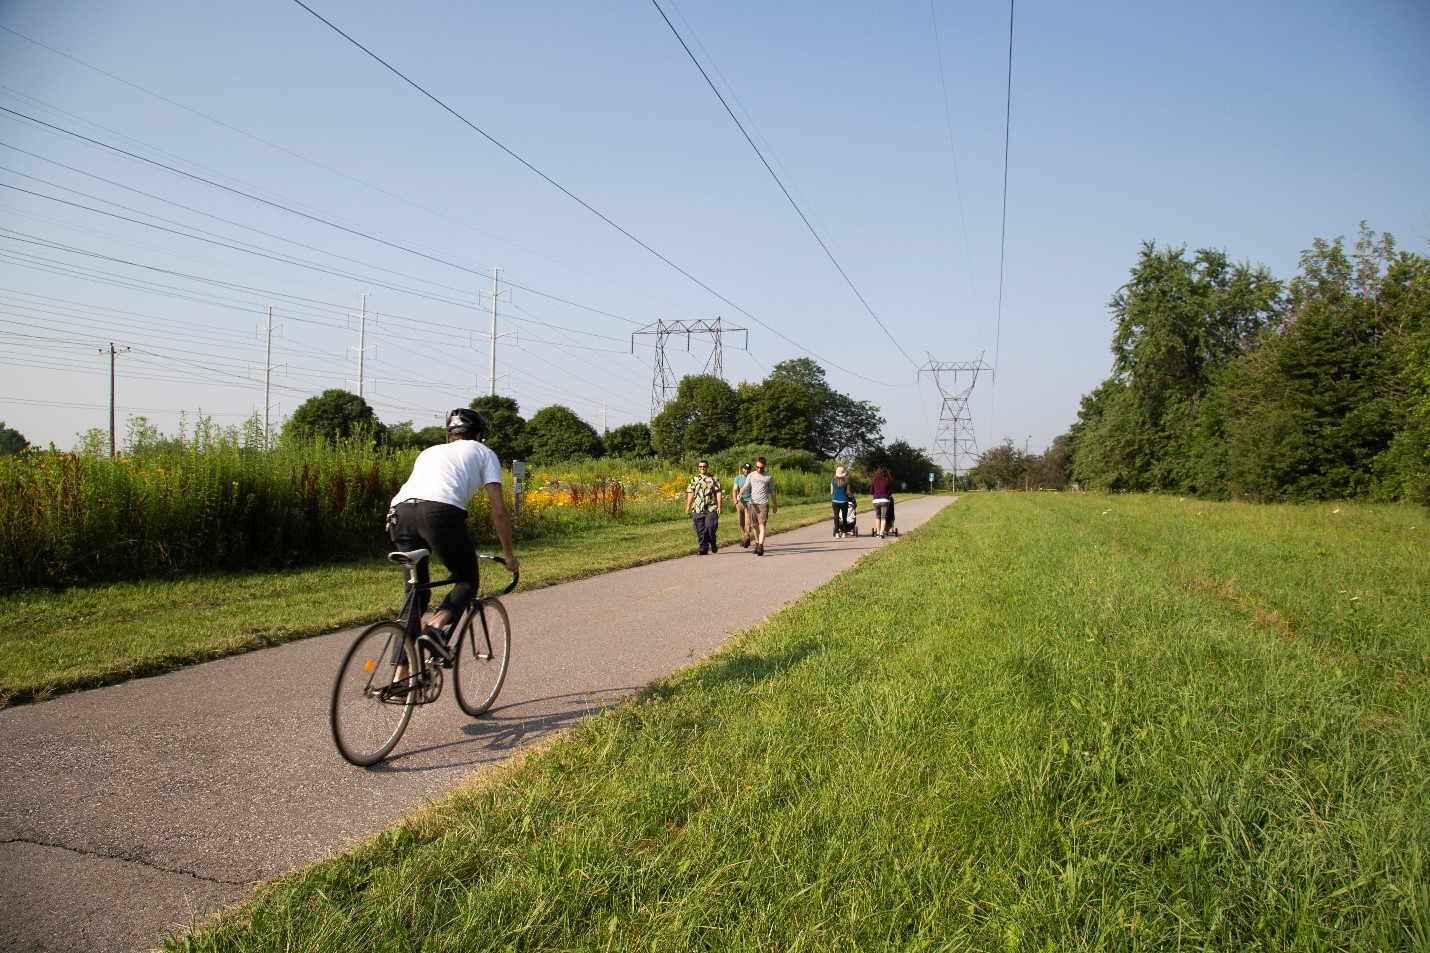 Cycling and pedestrian activity continues to increase as new trail linkages are constructed